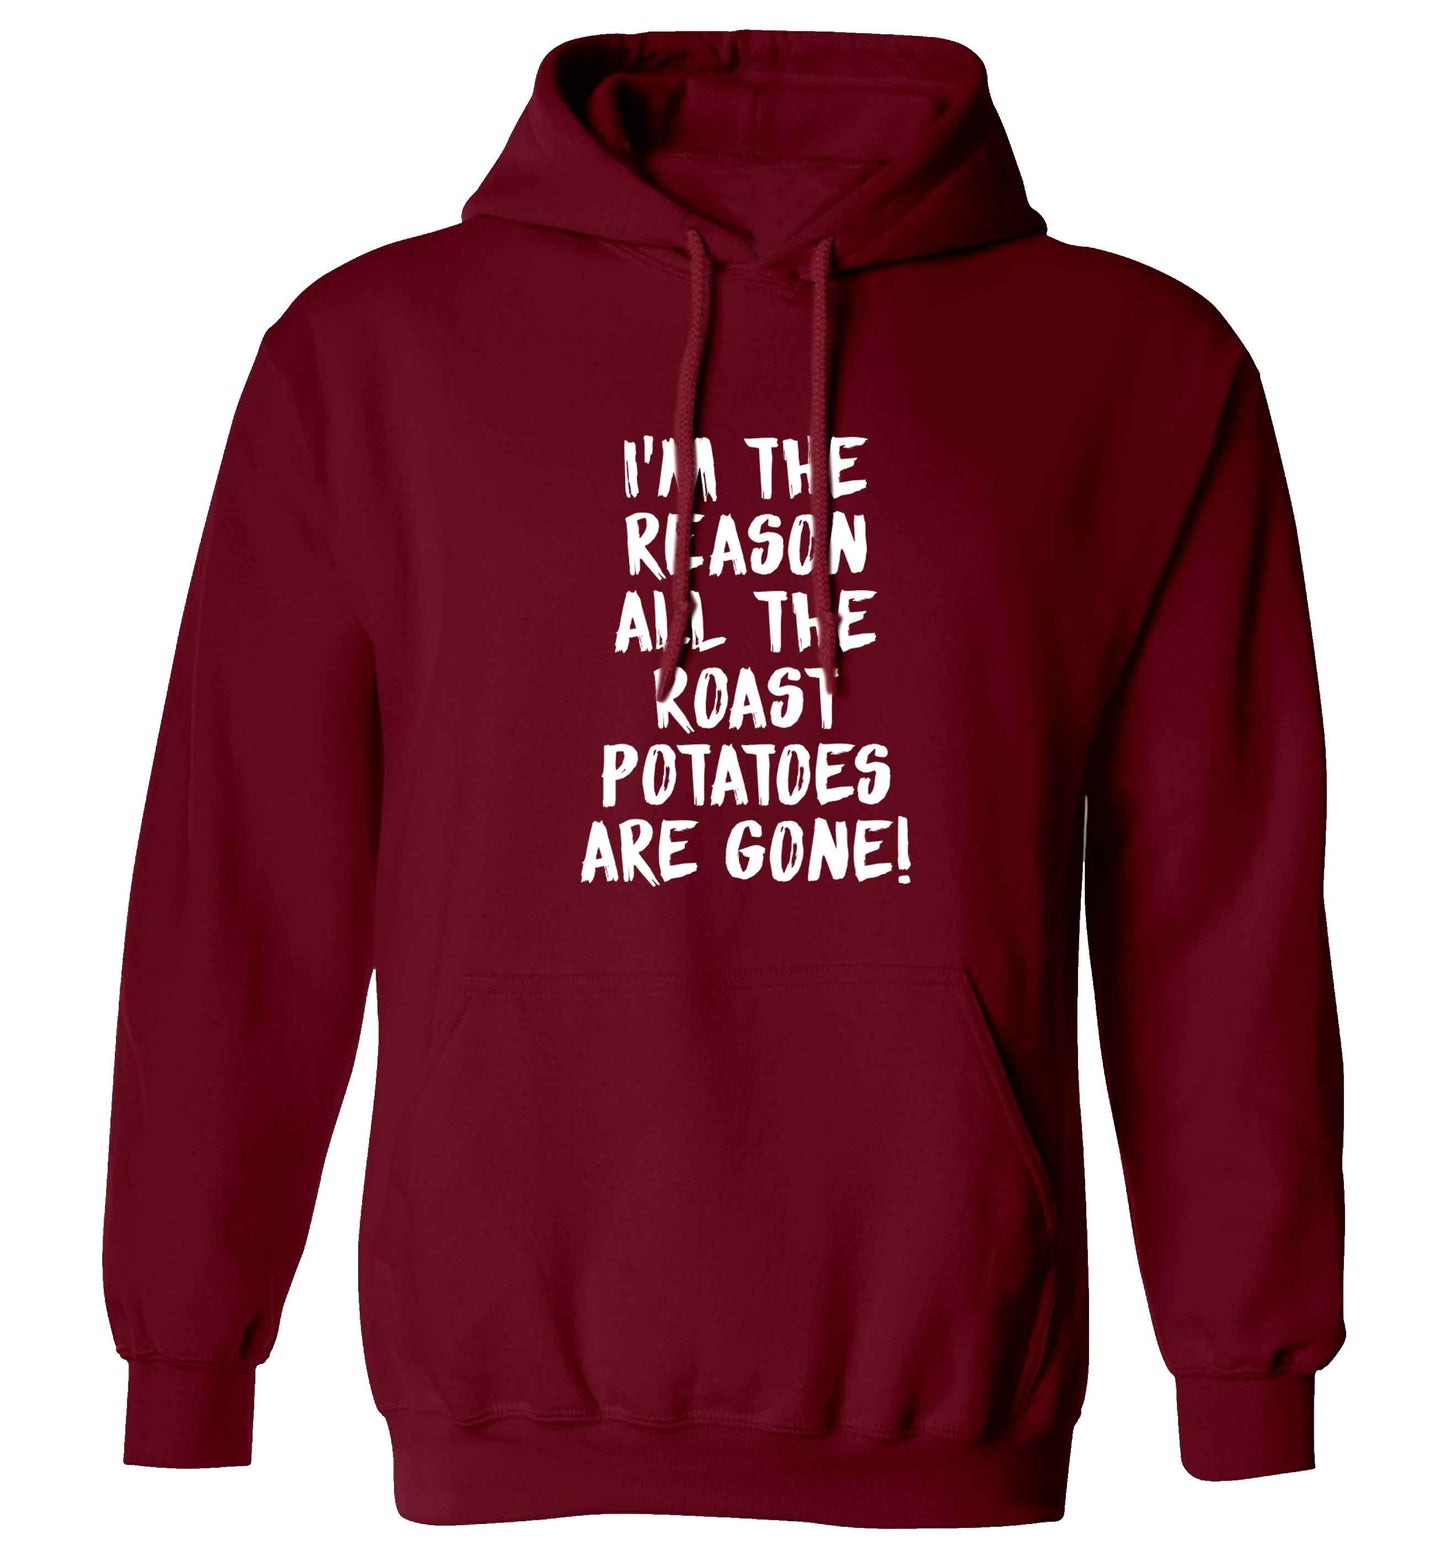 I'm the reason all the roast potatoes are gone adults unisex maroon hoodie 2XL